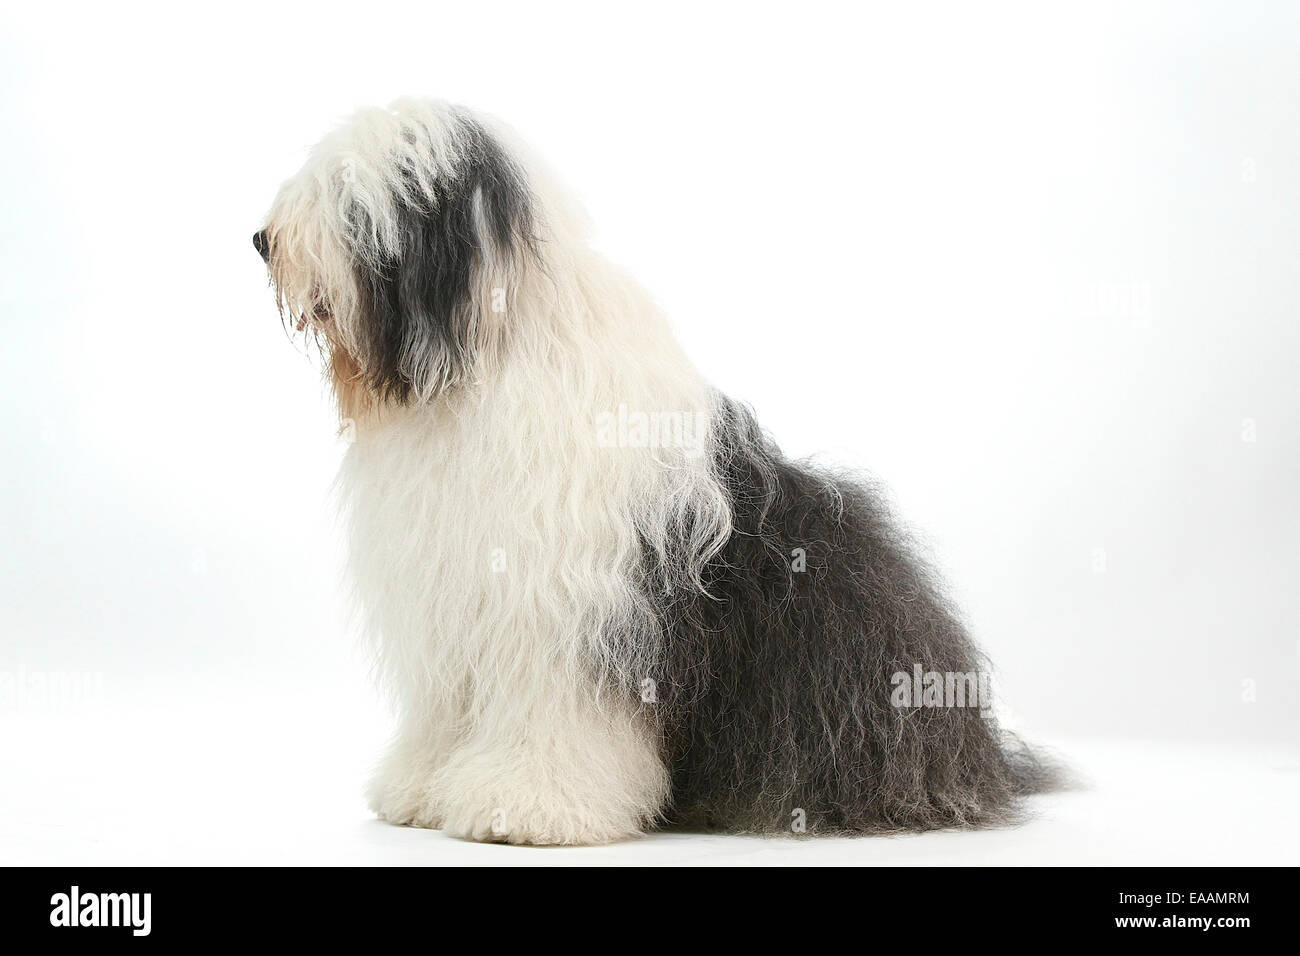 Old English Sheepdog Sitting In White Studio Stock Photo, Picture and  Royalty Free Image. Image 66897264.